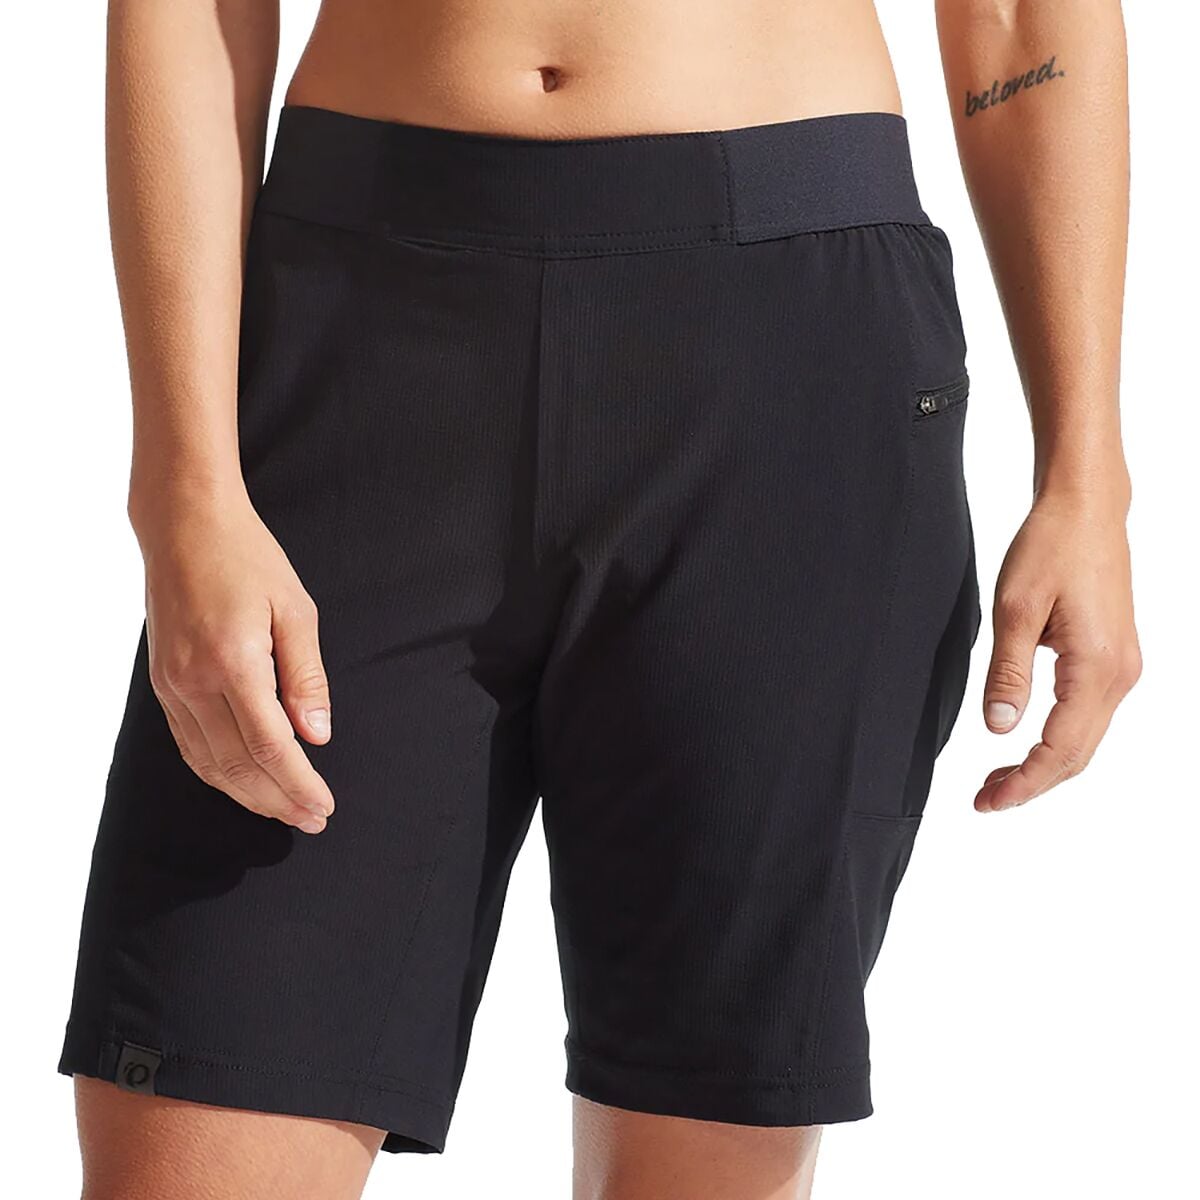 PEARL iZUMi Canyon Short With Liner - Women's Black, 4